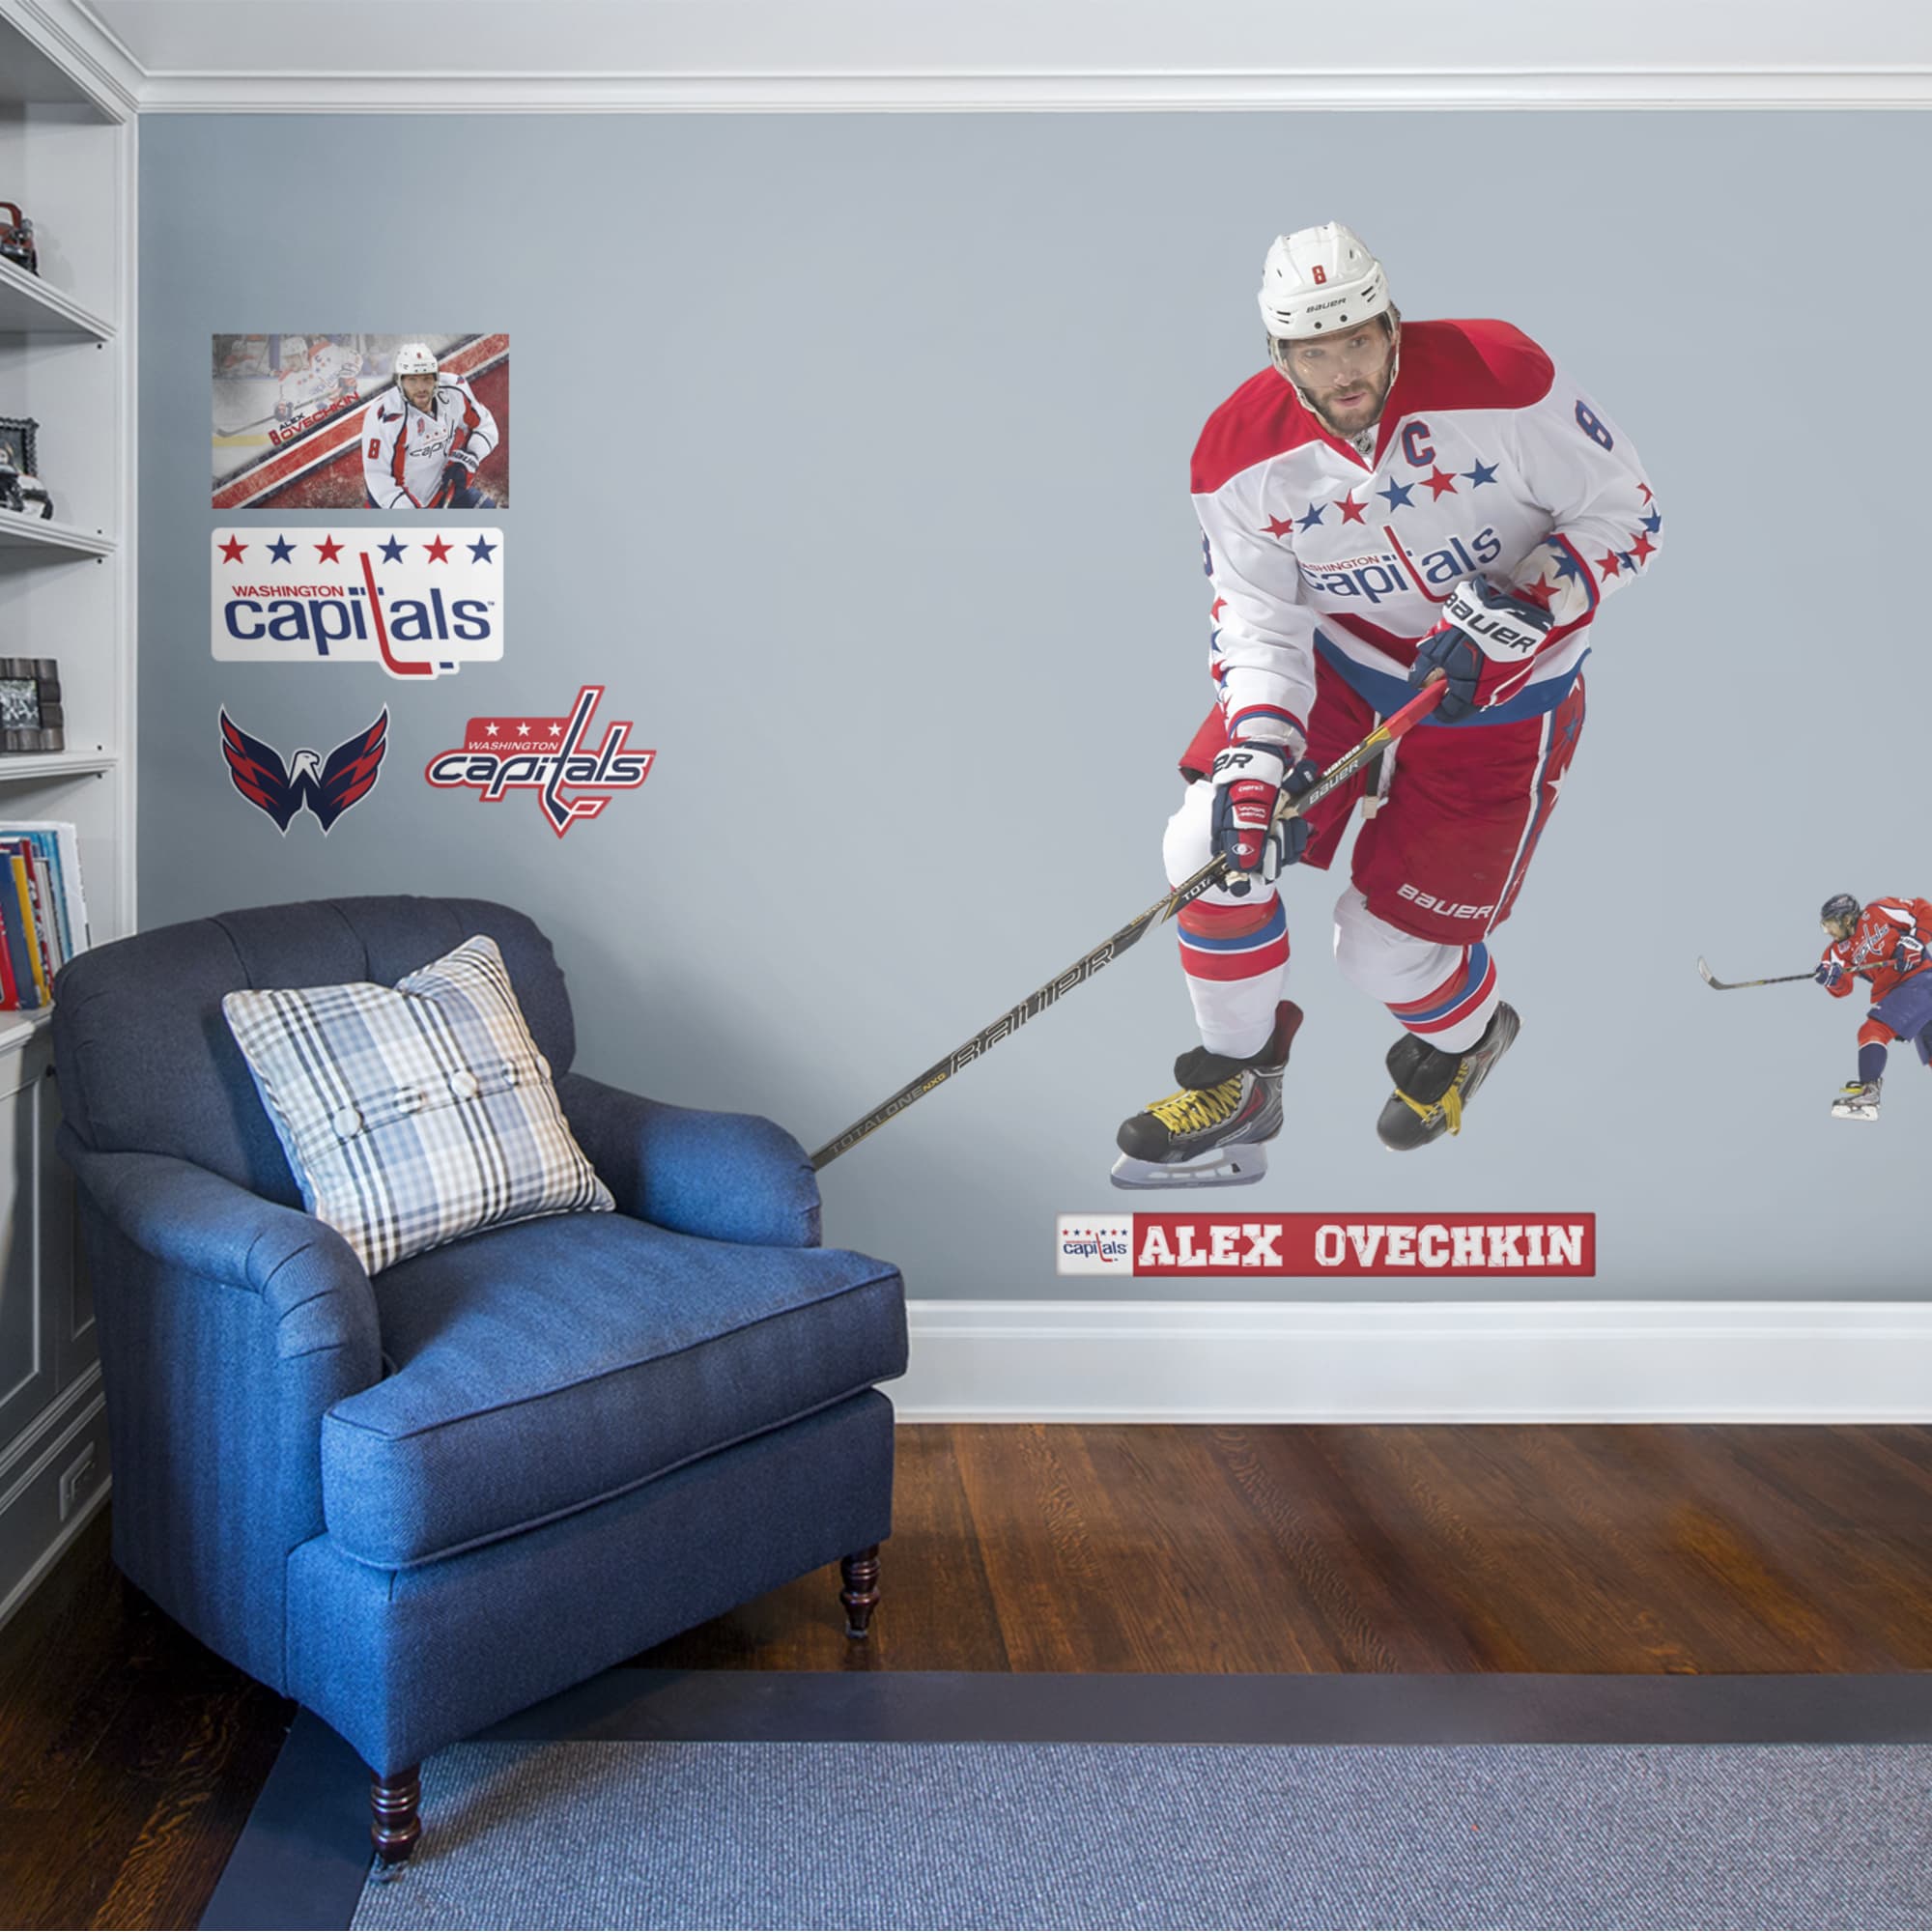 Alex Ovechkin for Washington Capitals: No. 8 - Officially Licensed NHL Removable Wall Decal Athlete +9 Team Decals (72"W x 72"H)